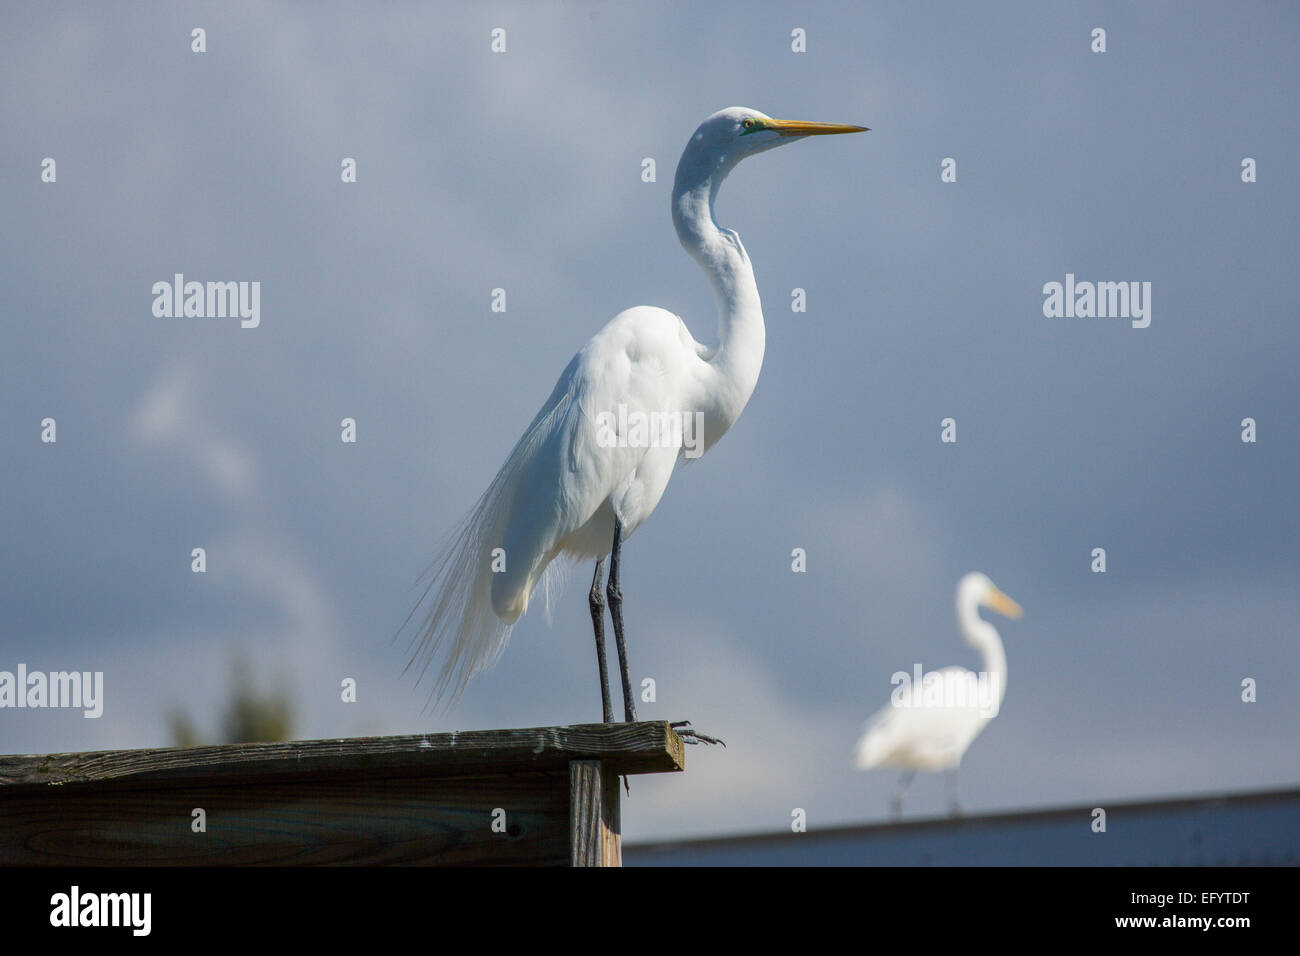 Great or American Egret Stock Photo